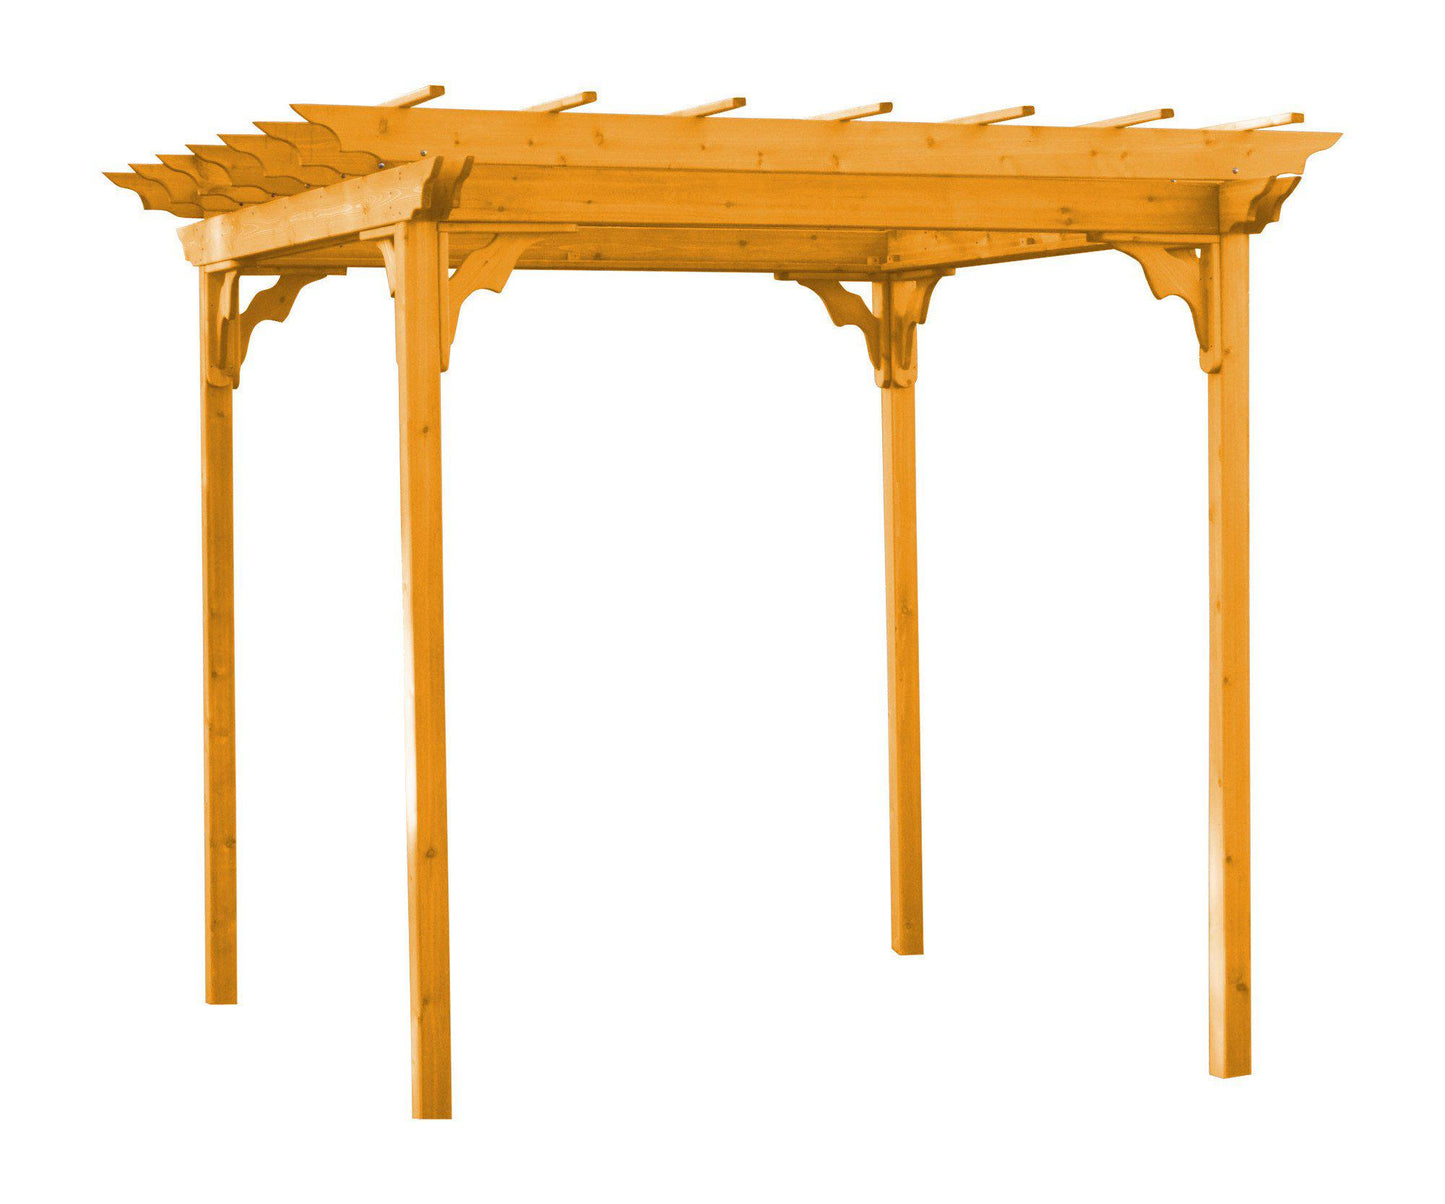 A&L Furniture Co. Western Red Cedar 6' x 8' Pergola W/ Swing Hangers - LEAD TIME TO SHIP 4 WEEKS OR LESS